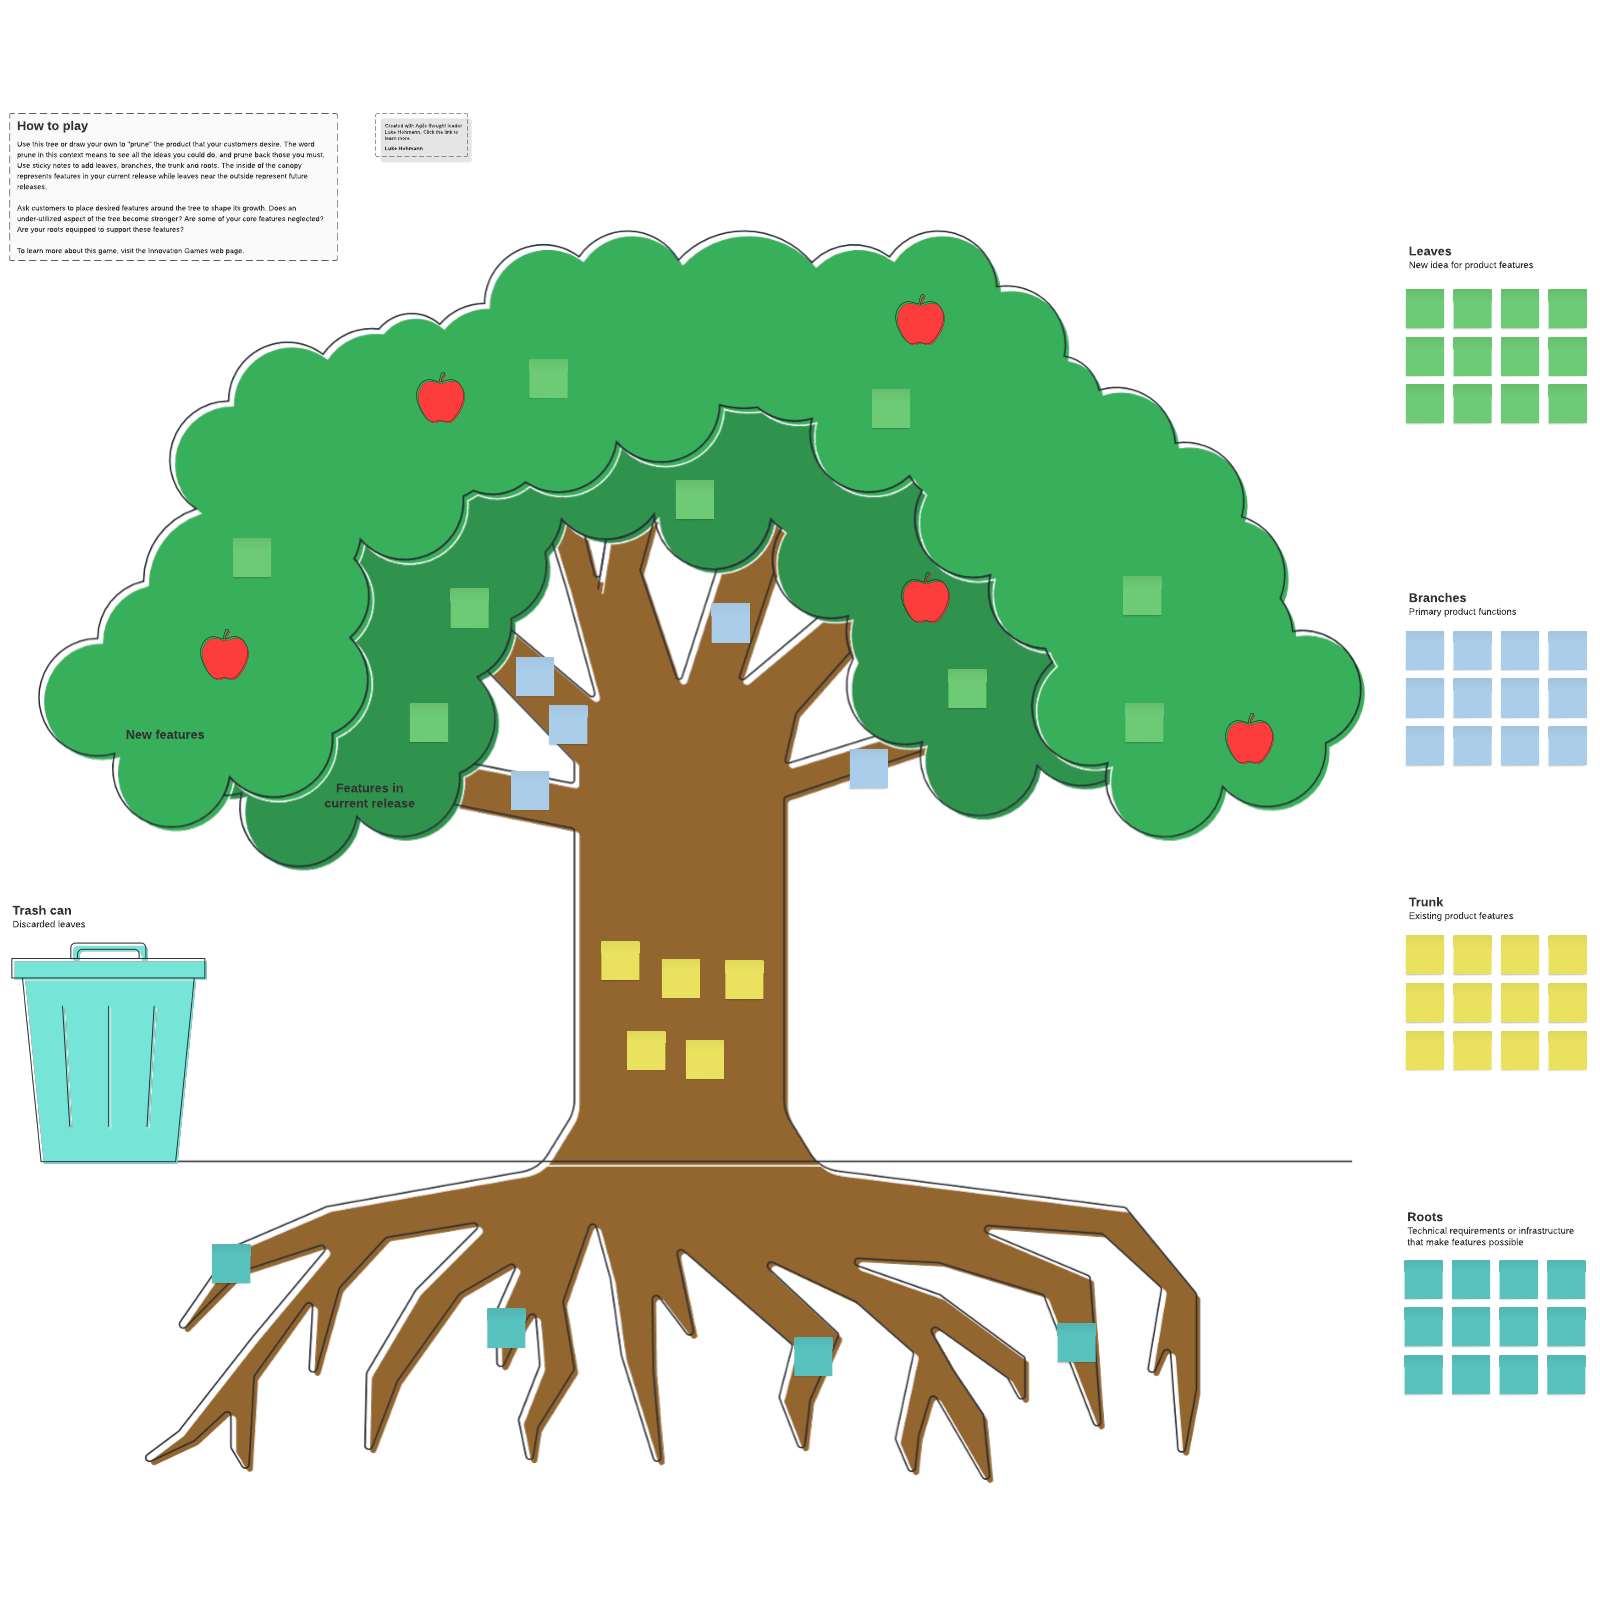 Prune the product tree example